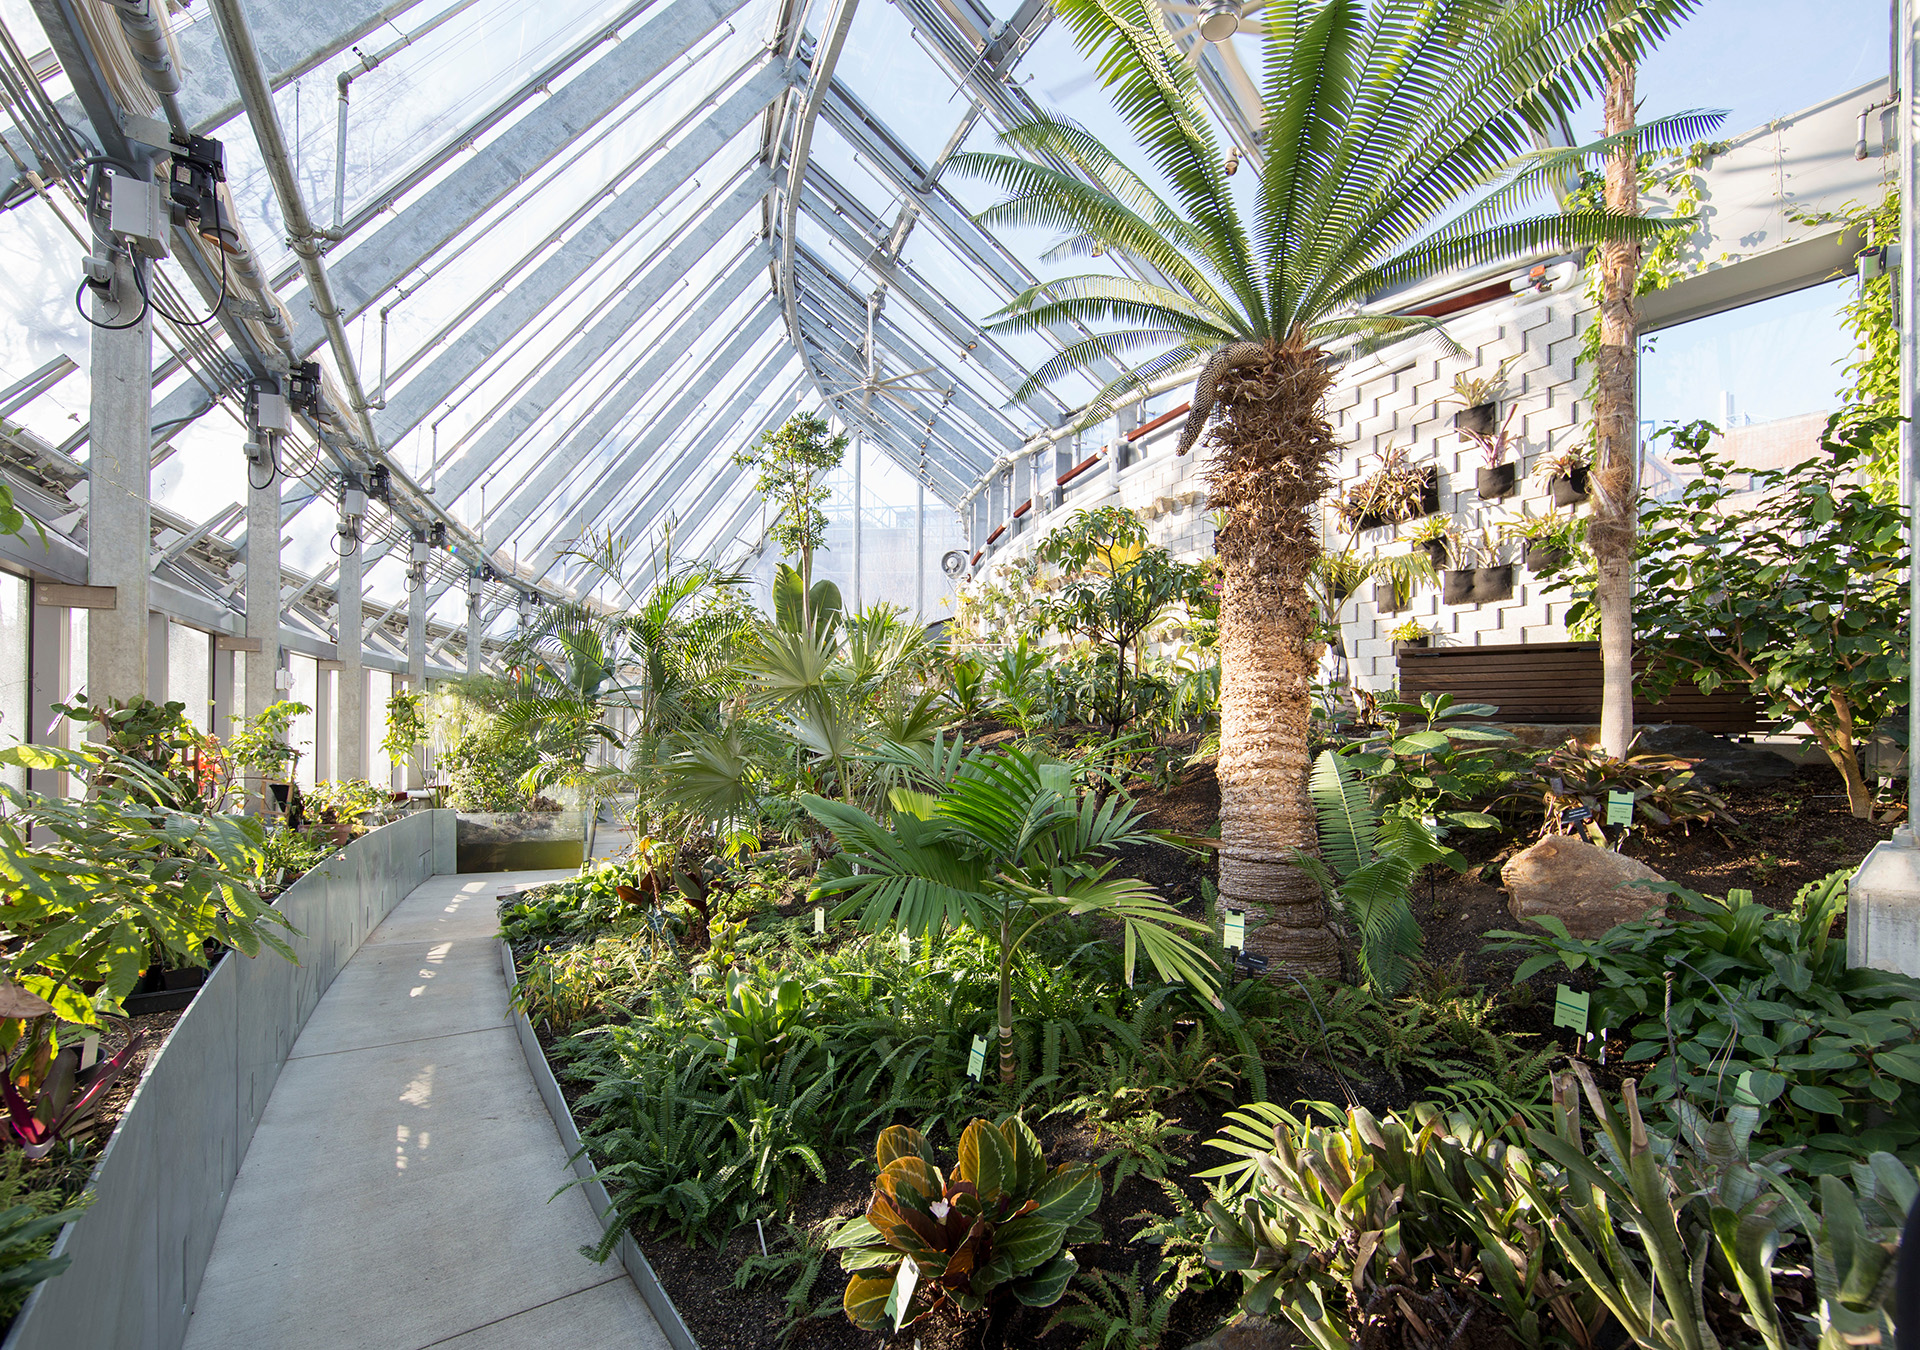 Global Flora Conservatory, a dynamic space brimming with diverse vegetation